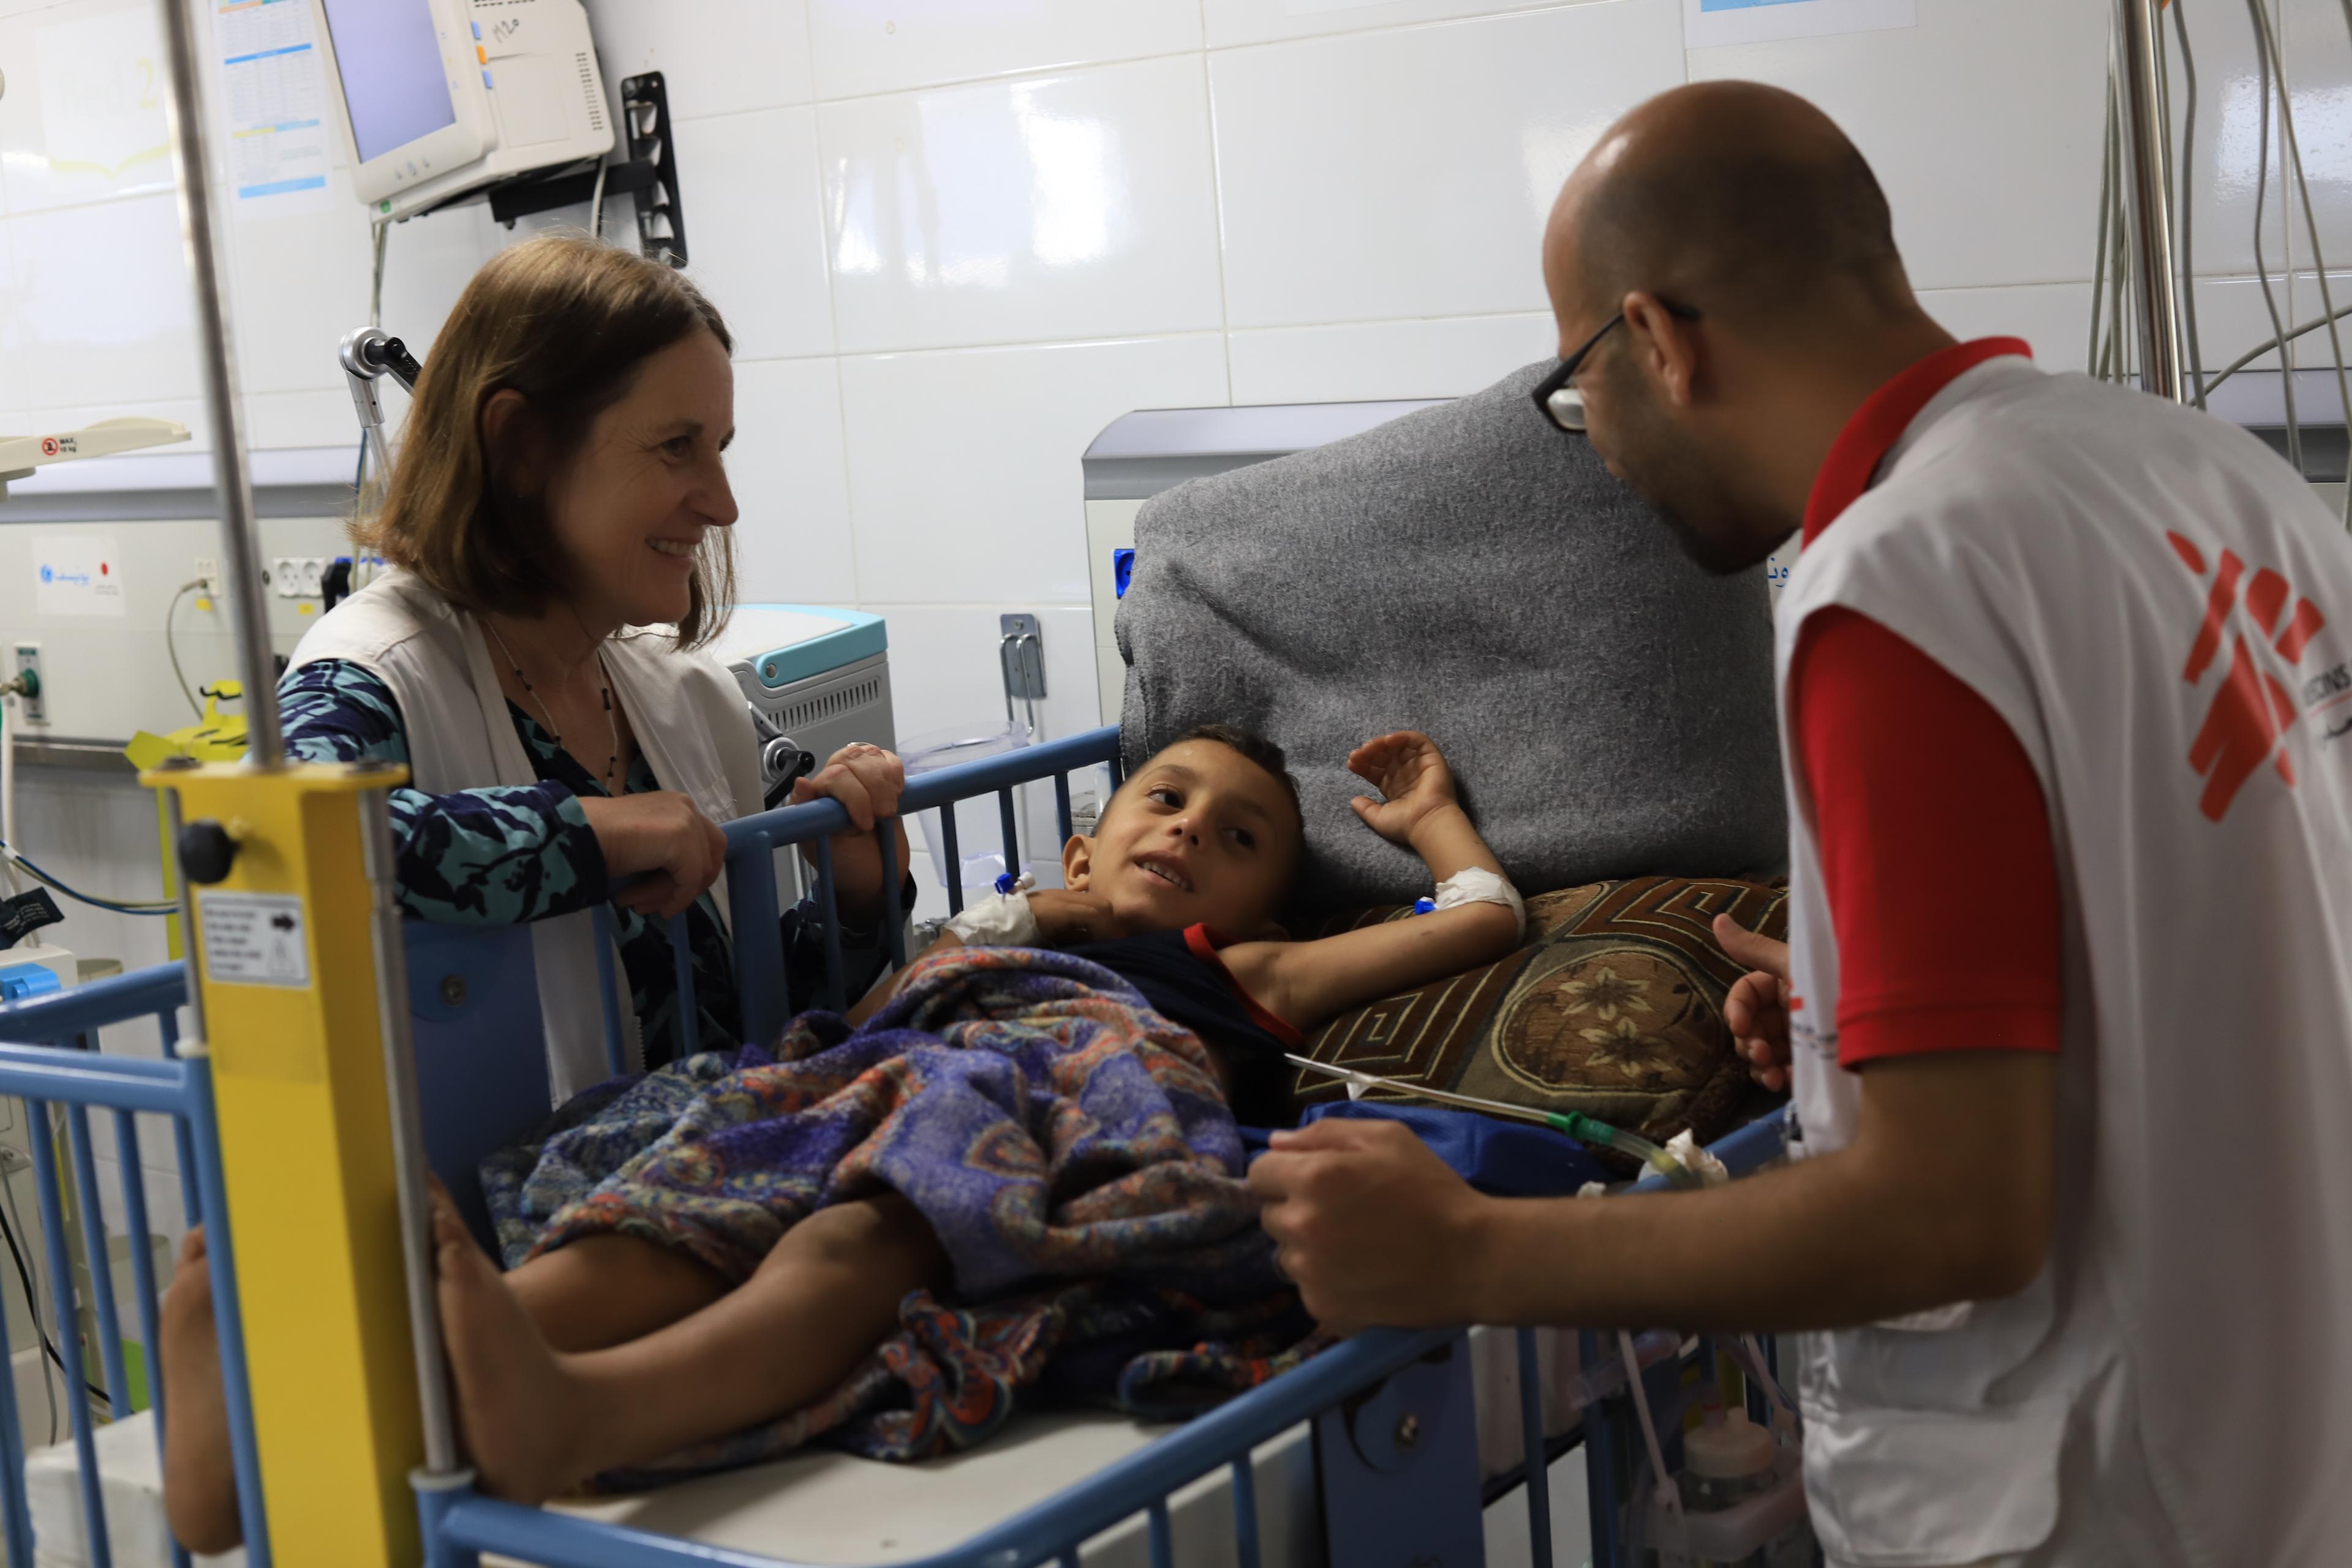 Mohammad Shihada, nurse supervisor, and Joanne Perry, medical referent for the project in Gaza, look after a patient receiving treatment after being injured in Gaza. Mariam Abu Dagga/MSF 